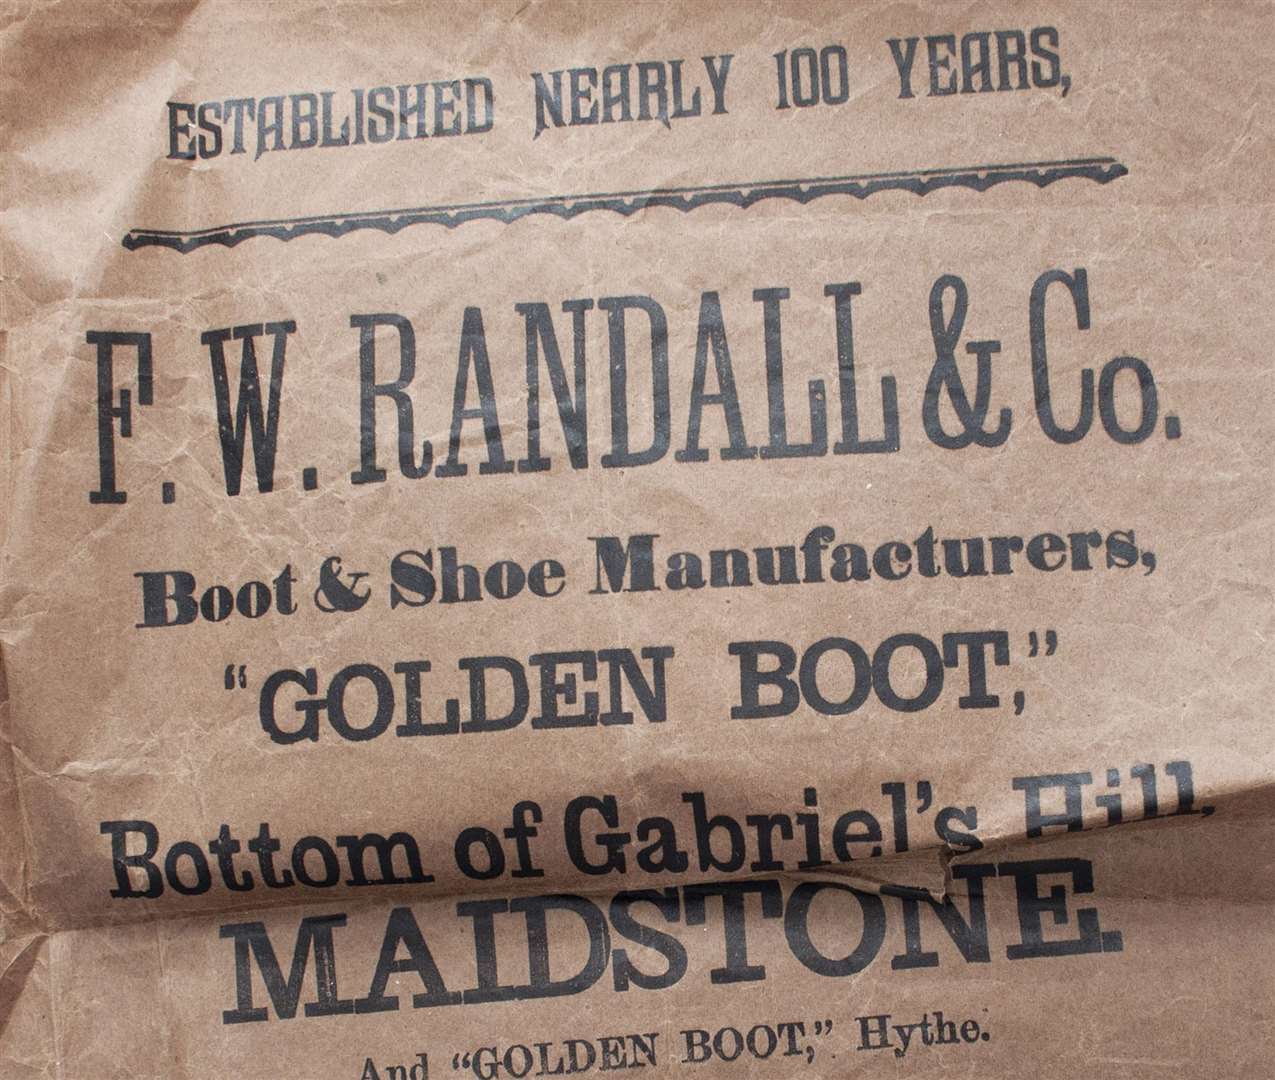 An advert for the business from the 1880s